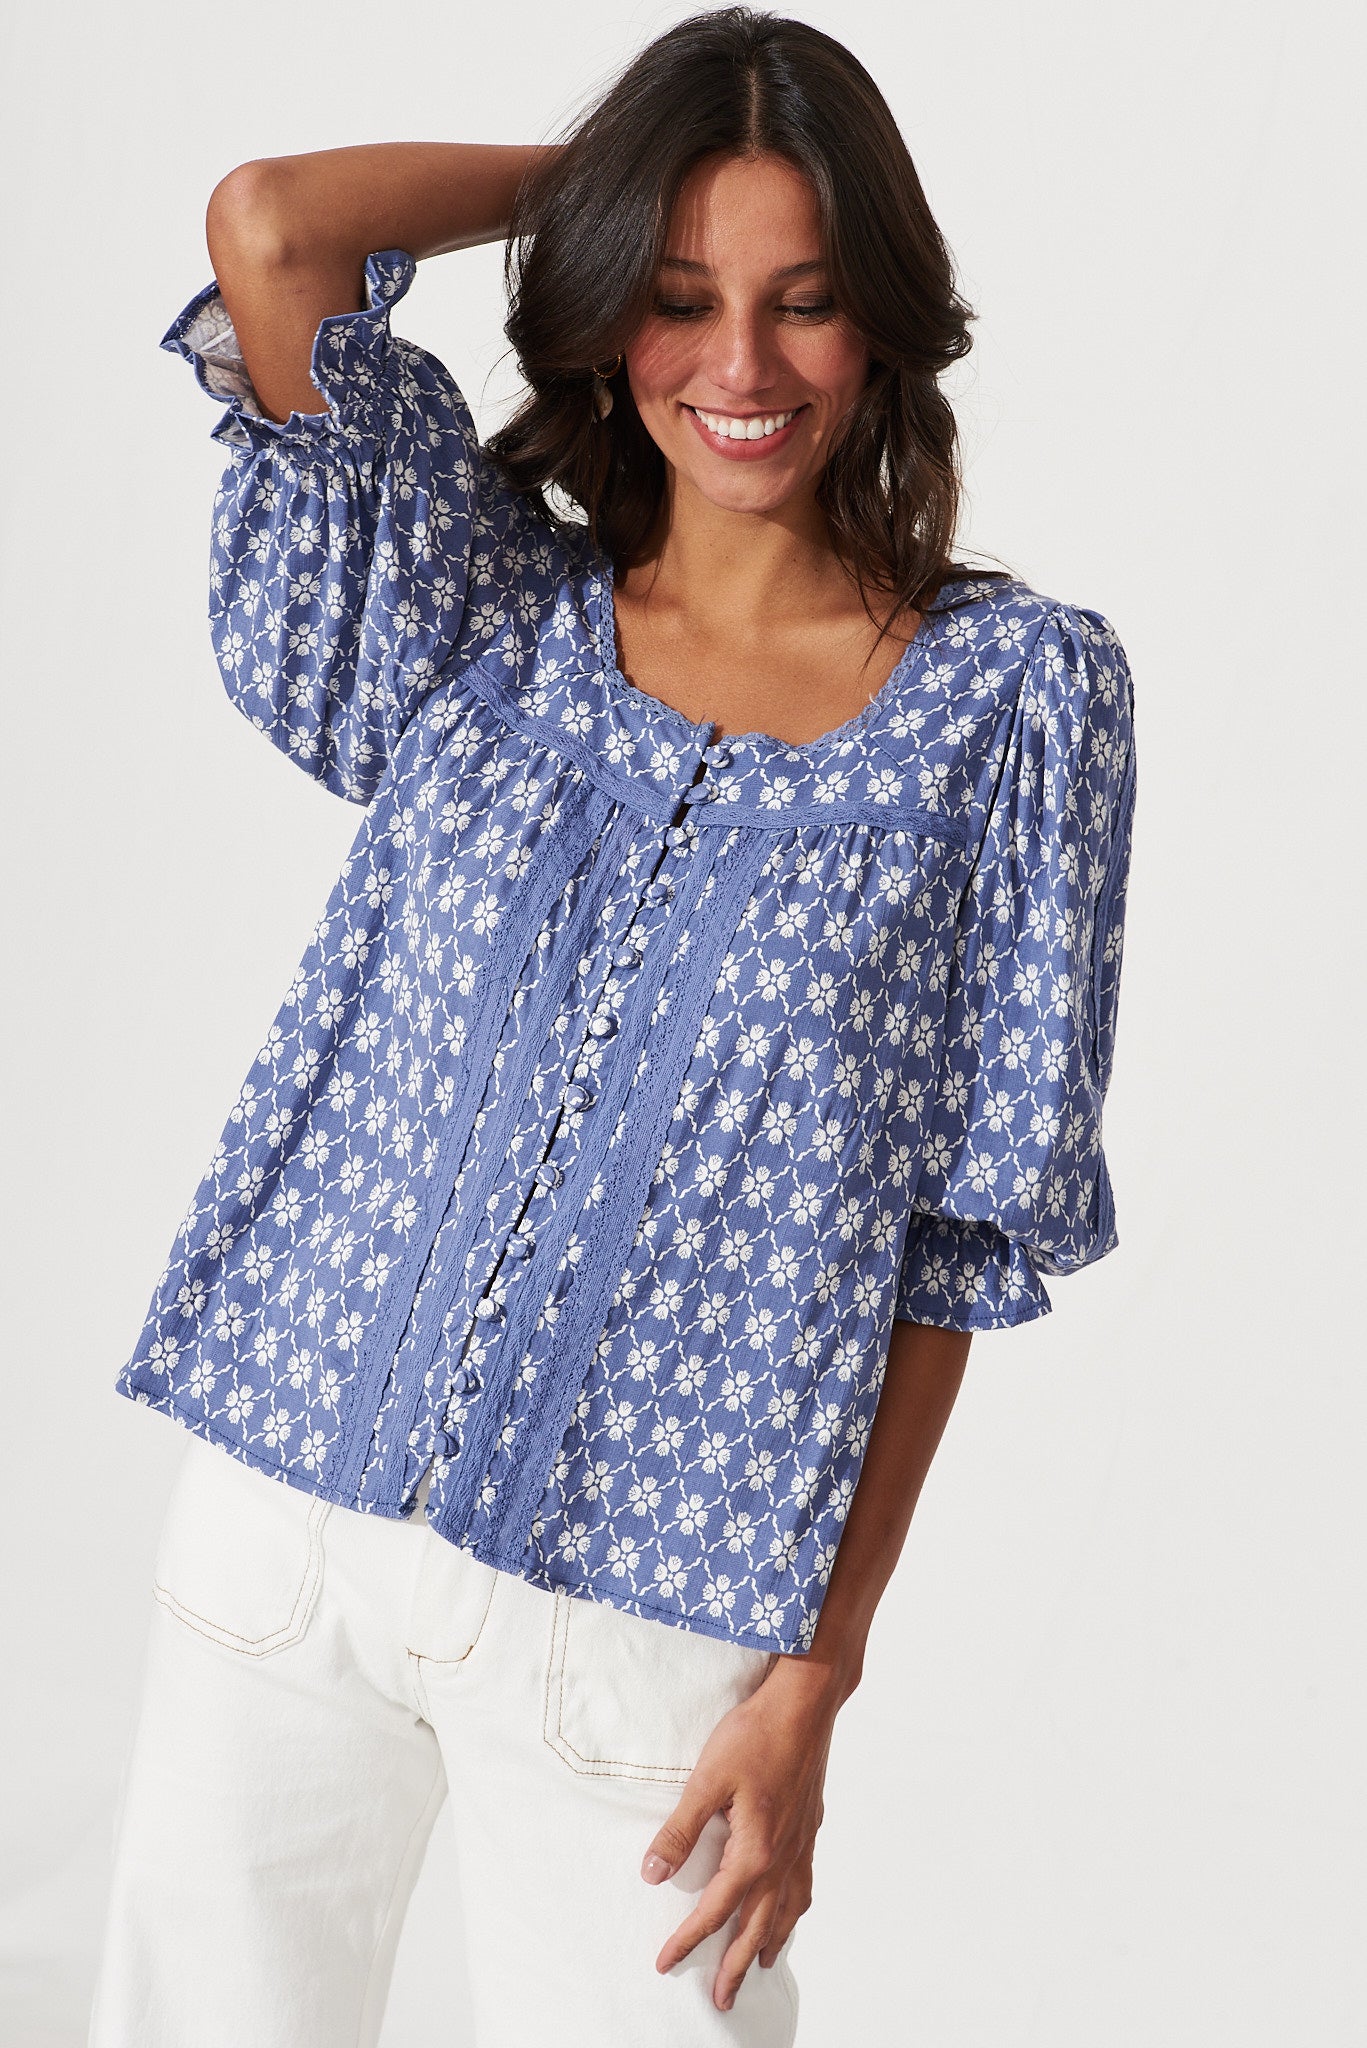 Moonflower Top In Blue With White Print – St Frock